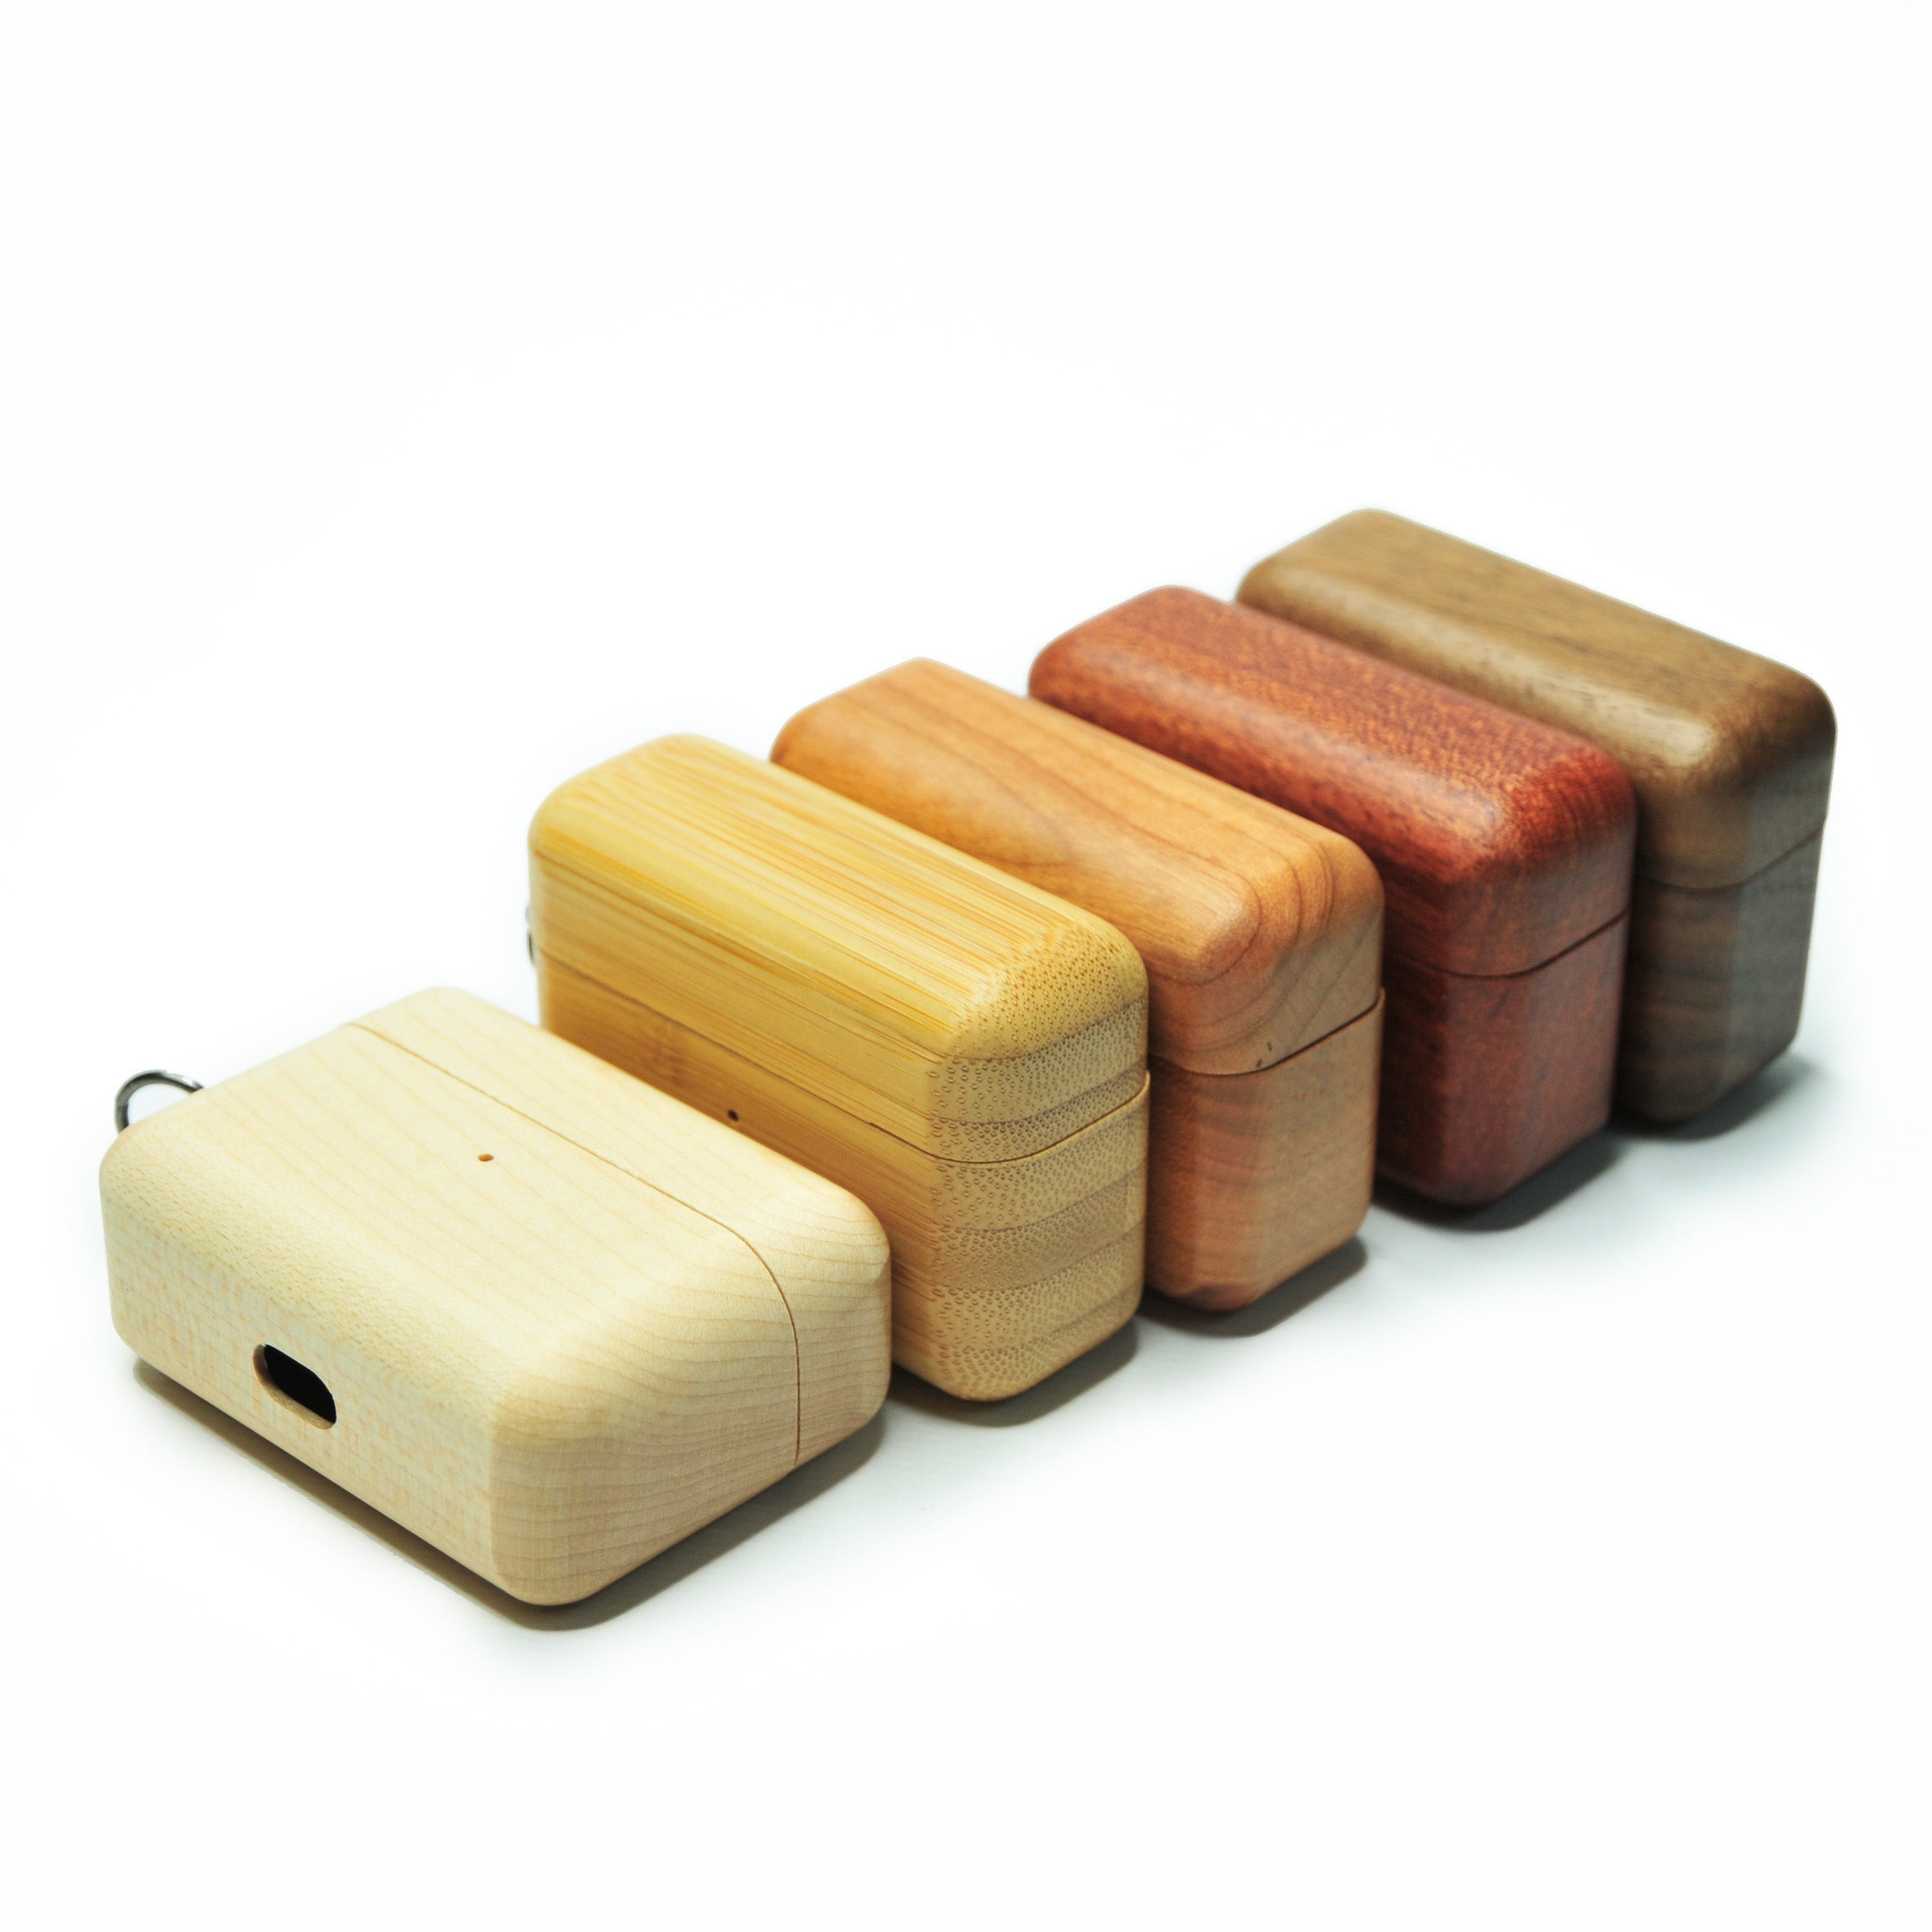 5 Types of wood Airpods 3rd Generation Case